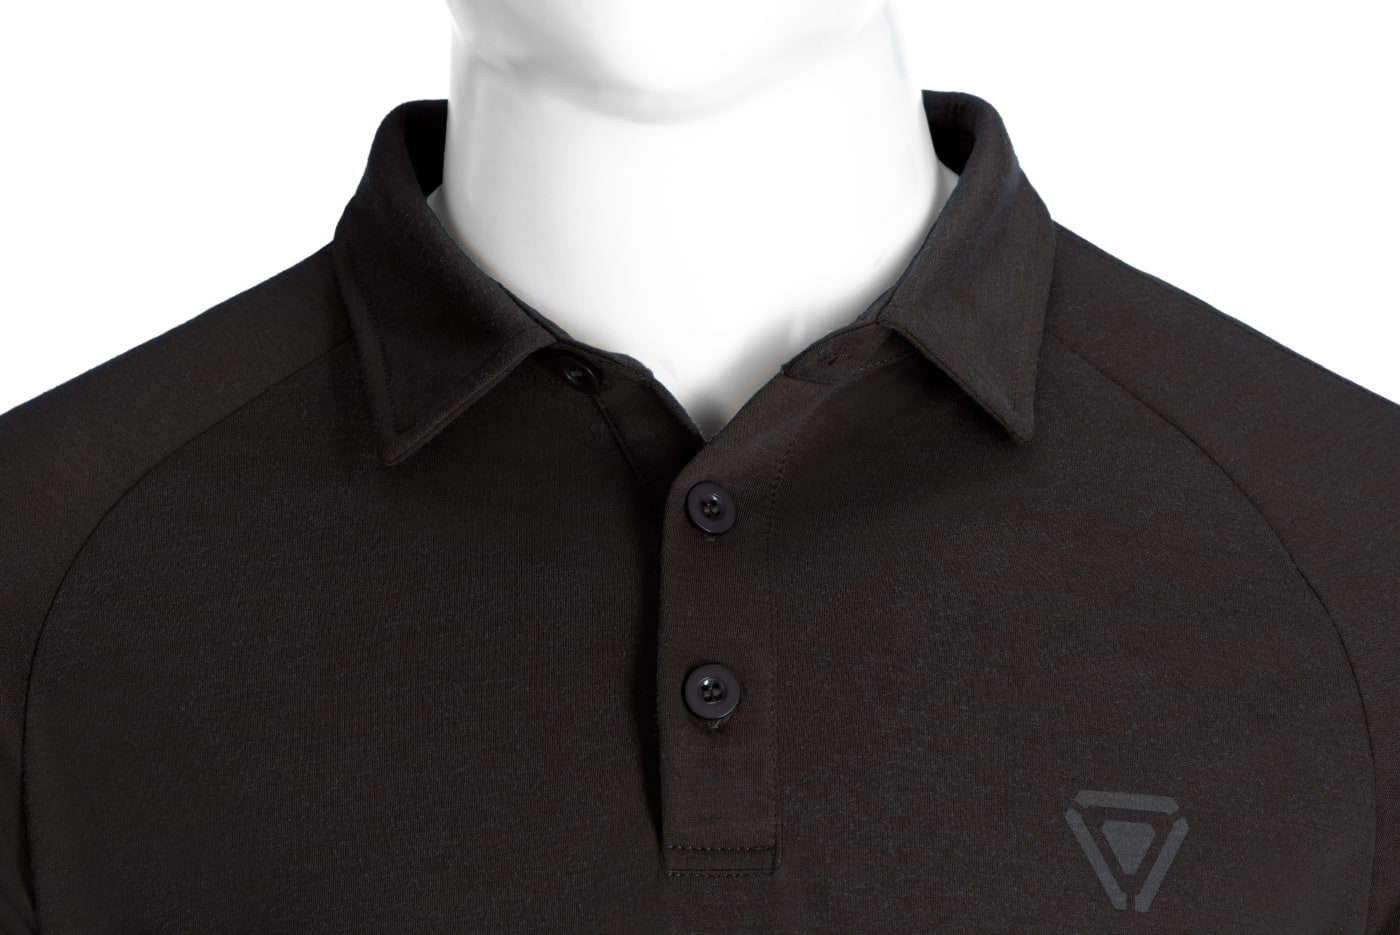 Outrider T.O.R.D. Performance Polo